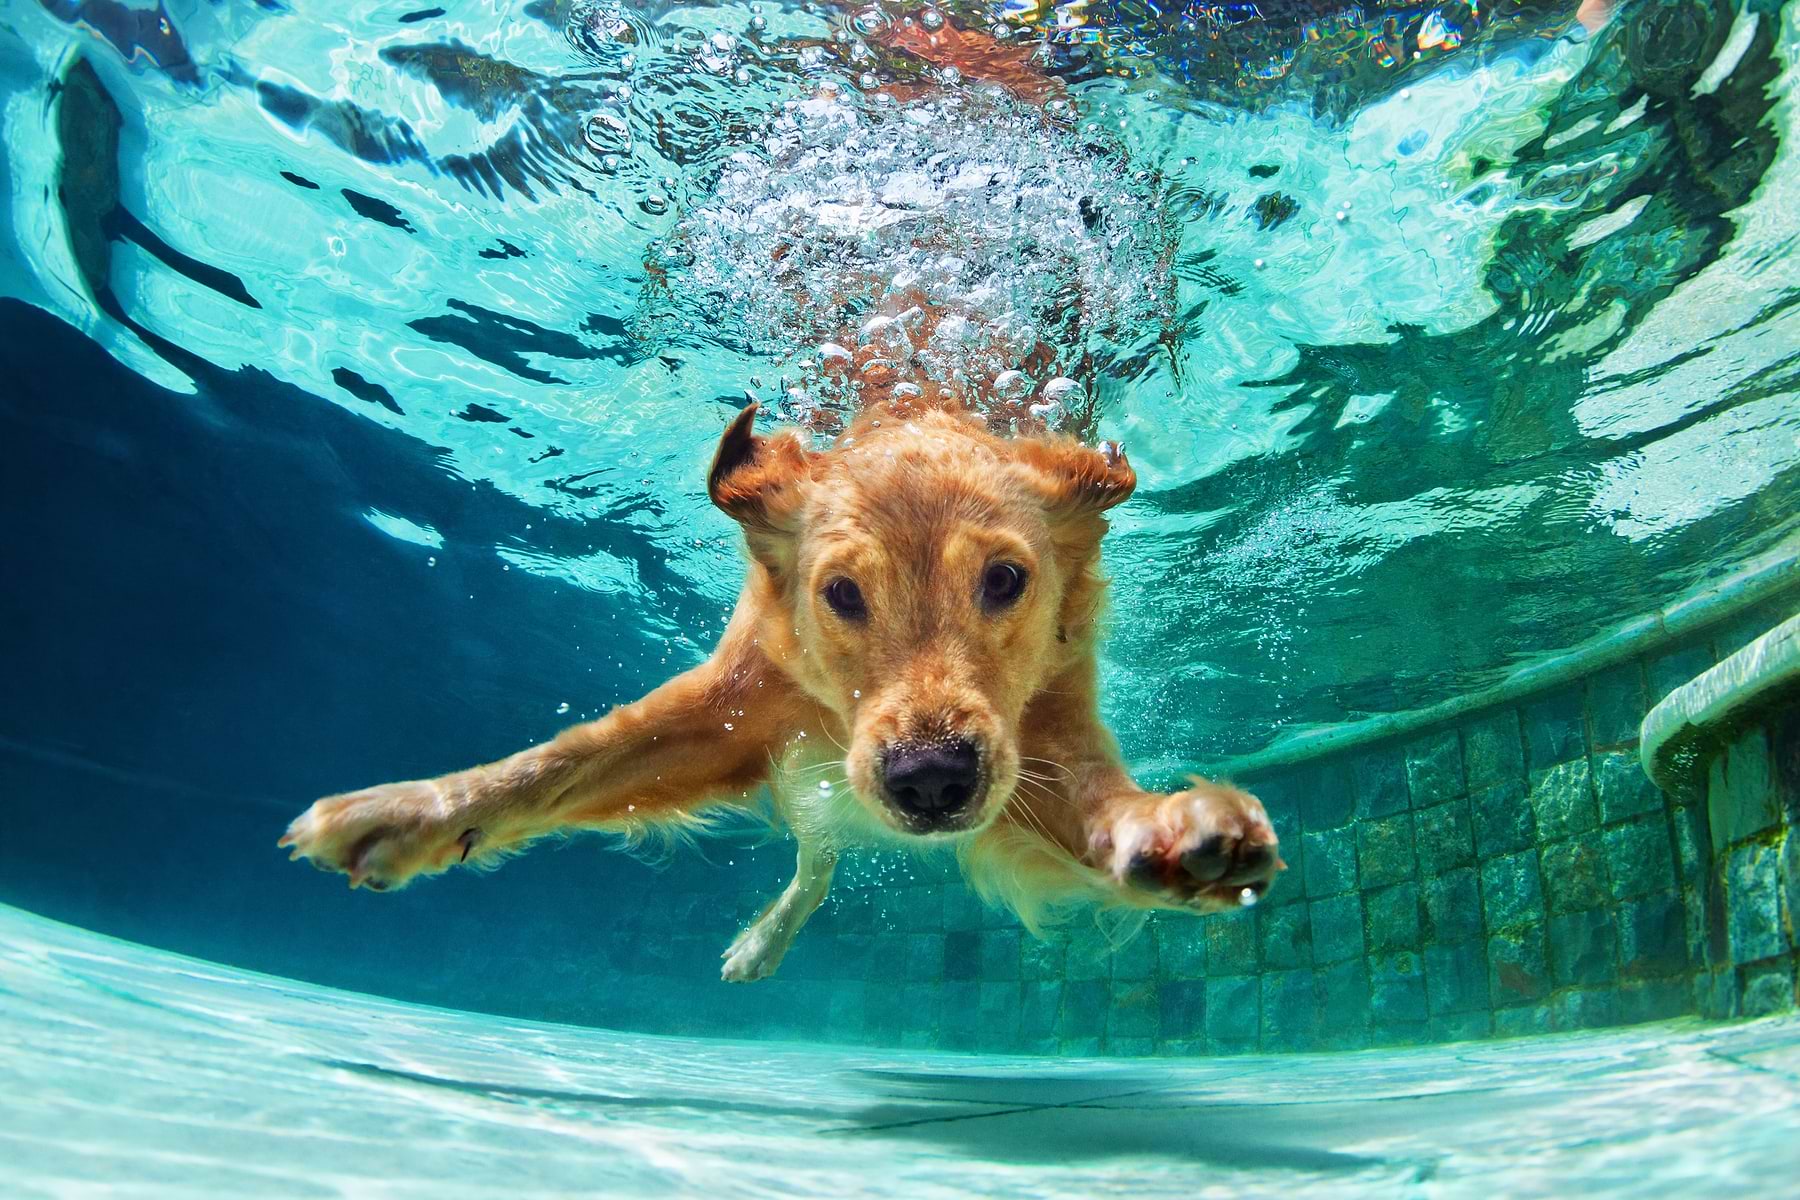 A brown dog dives into the water